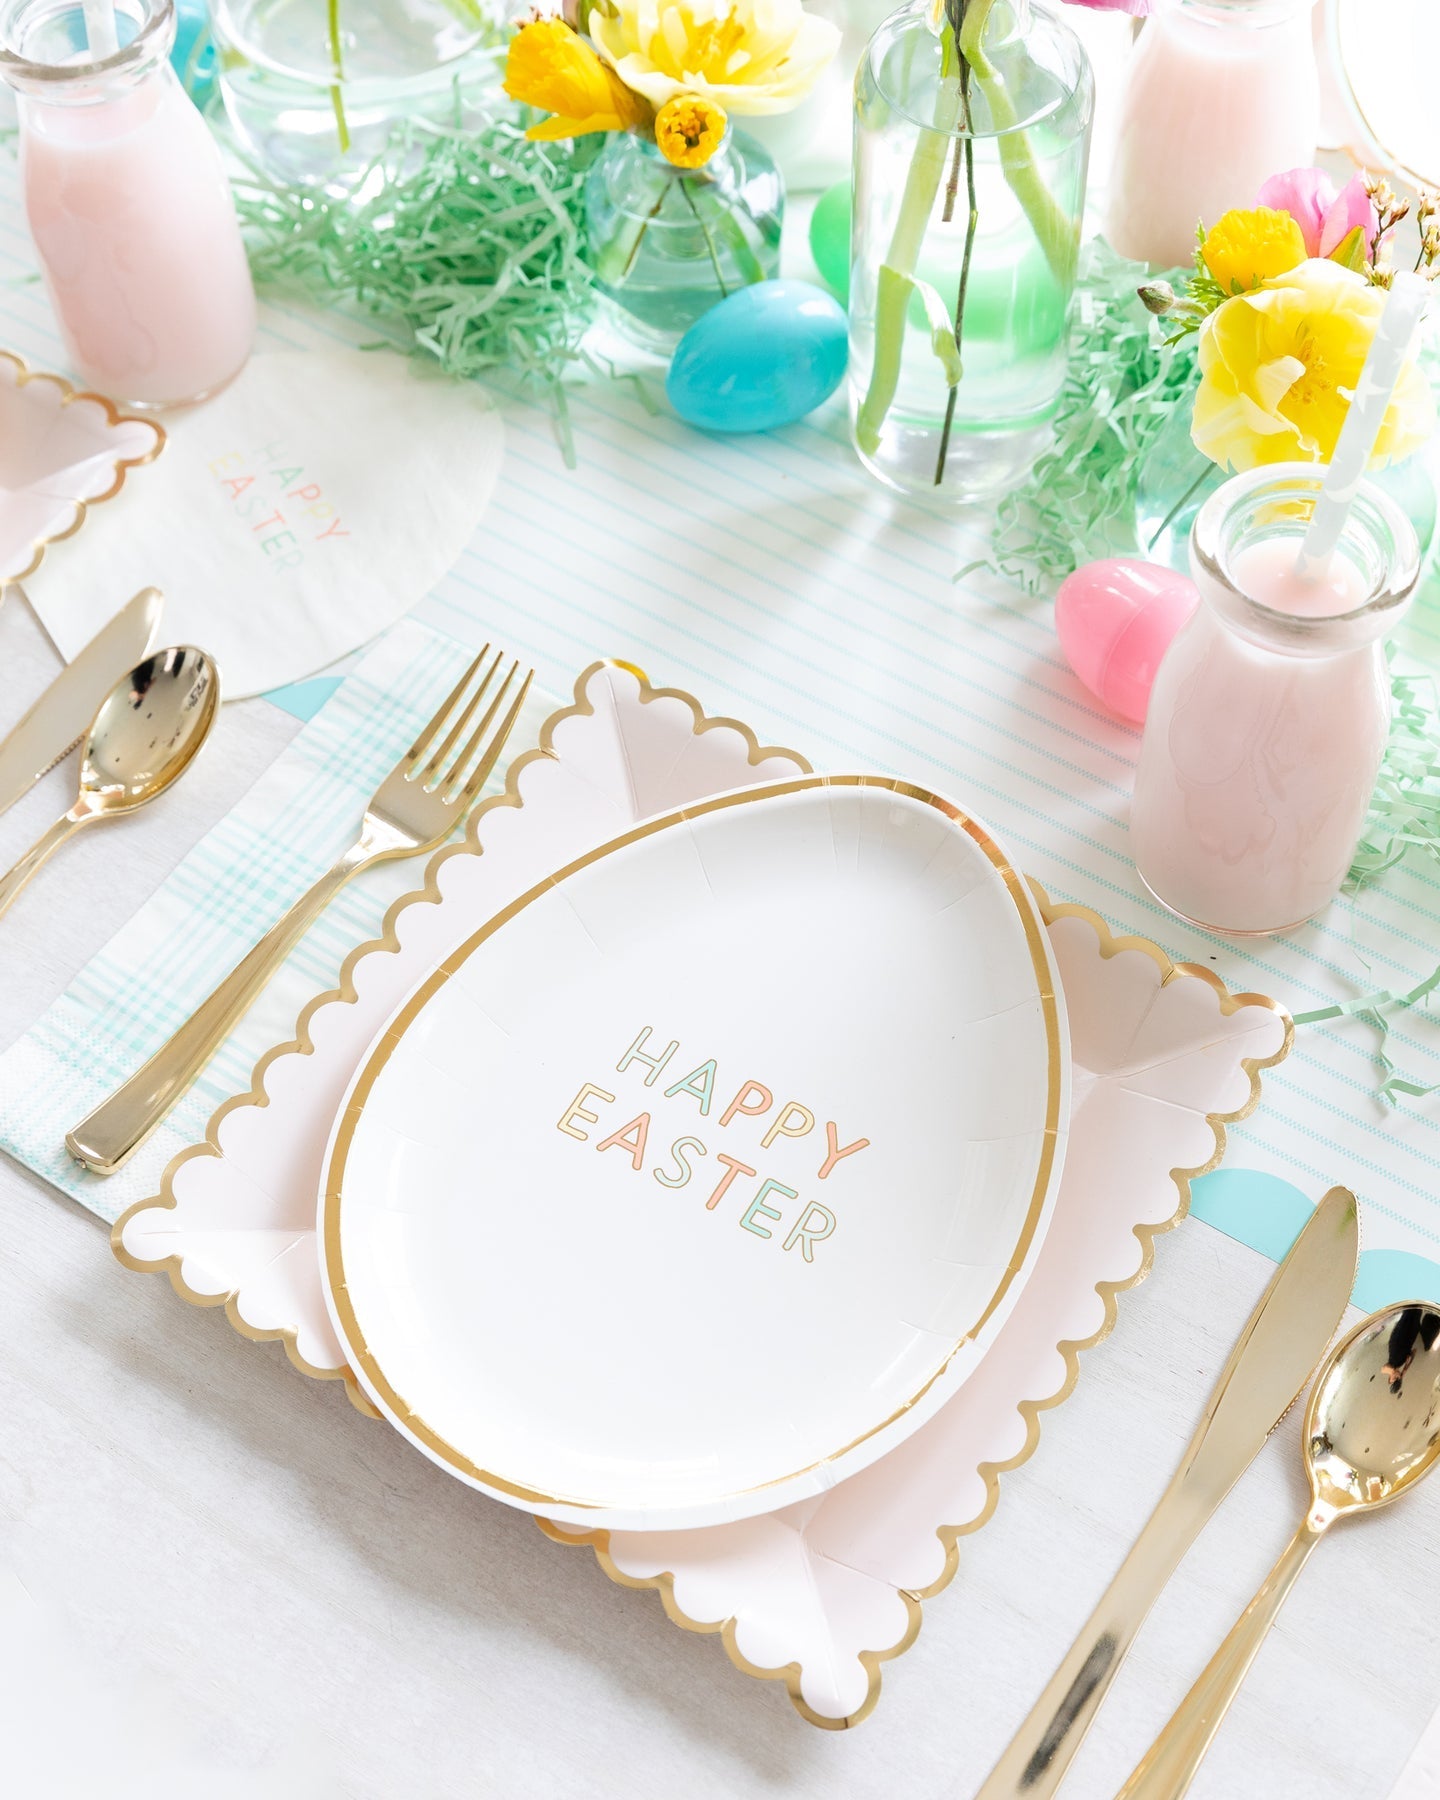 Happy Easter Egg Shaped Paper Plates - Oh My Darling Party Co-eastereaster eggeaster party #Fringe_Backdrop#